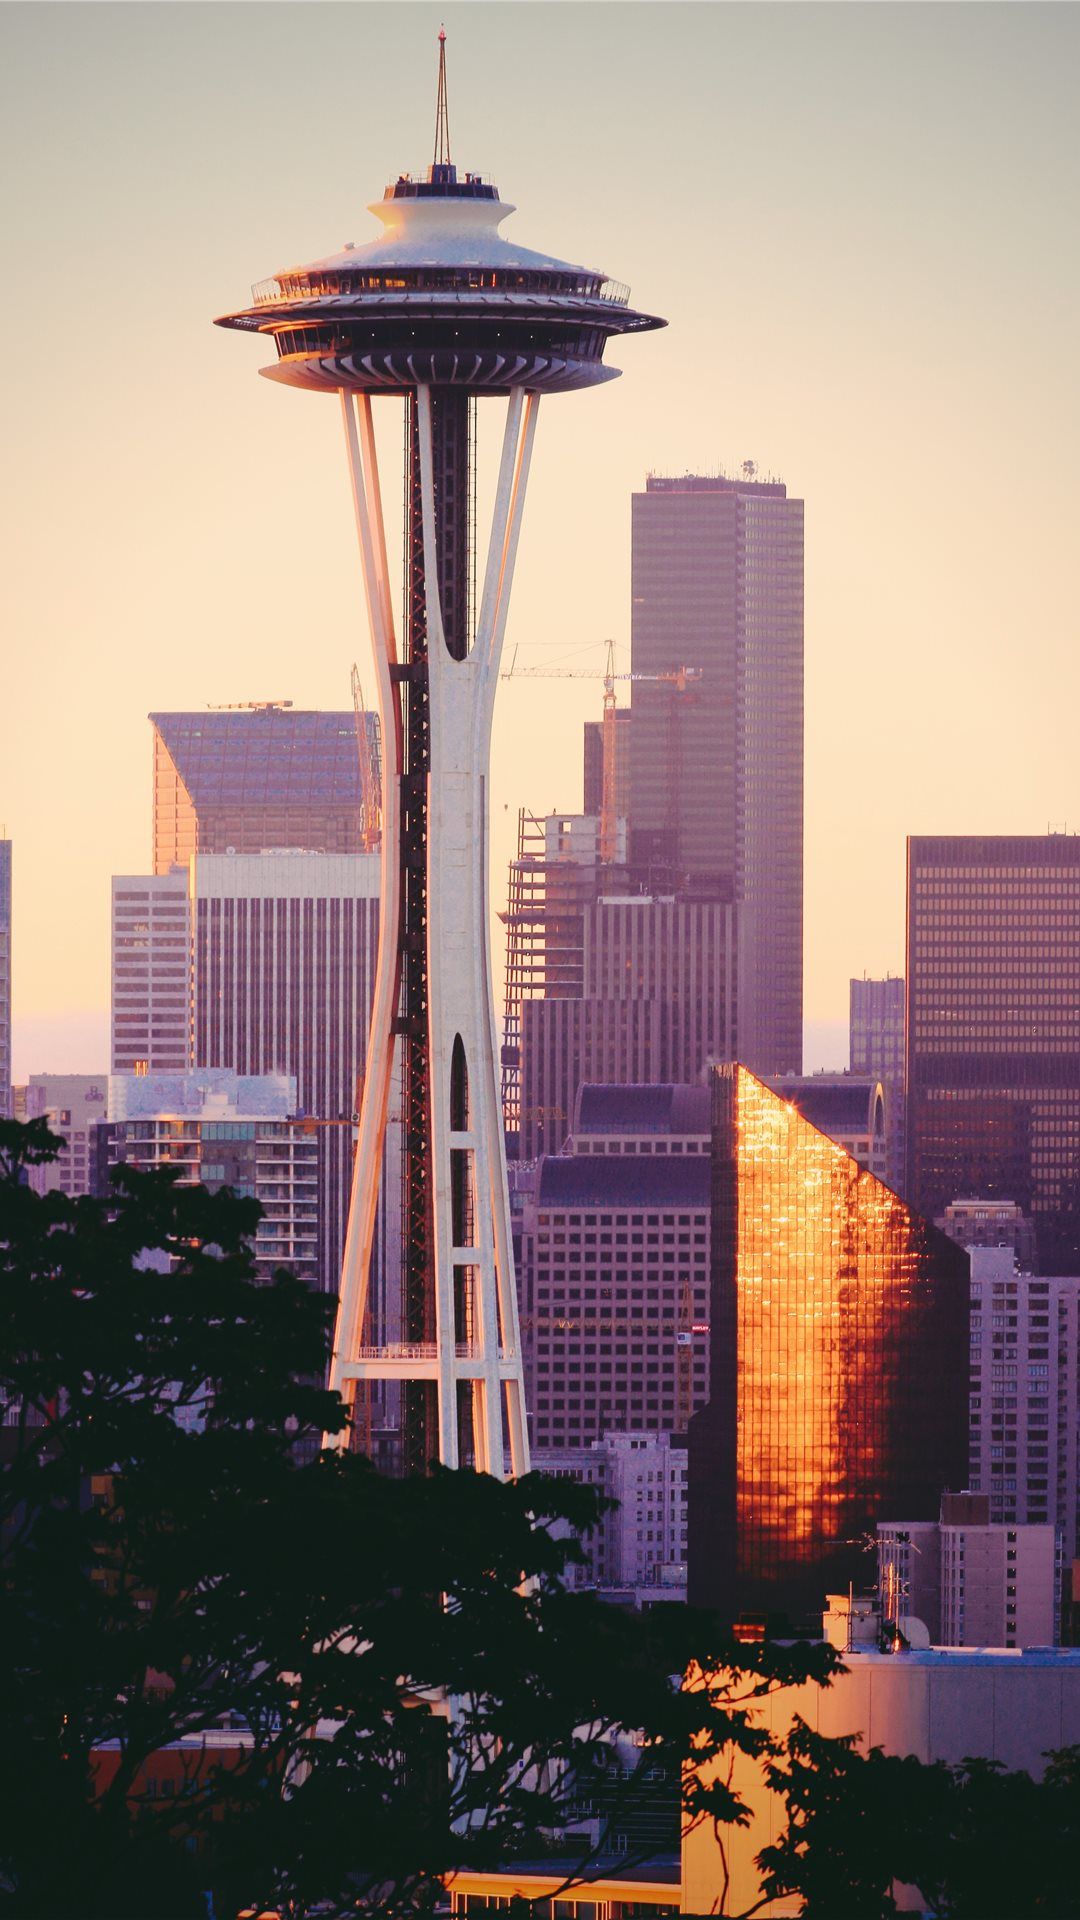 SpaceNeedle in the Morning iPhone 8 Wallpaper Free Download